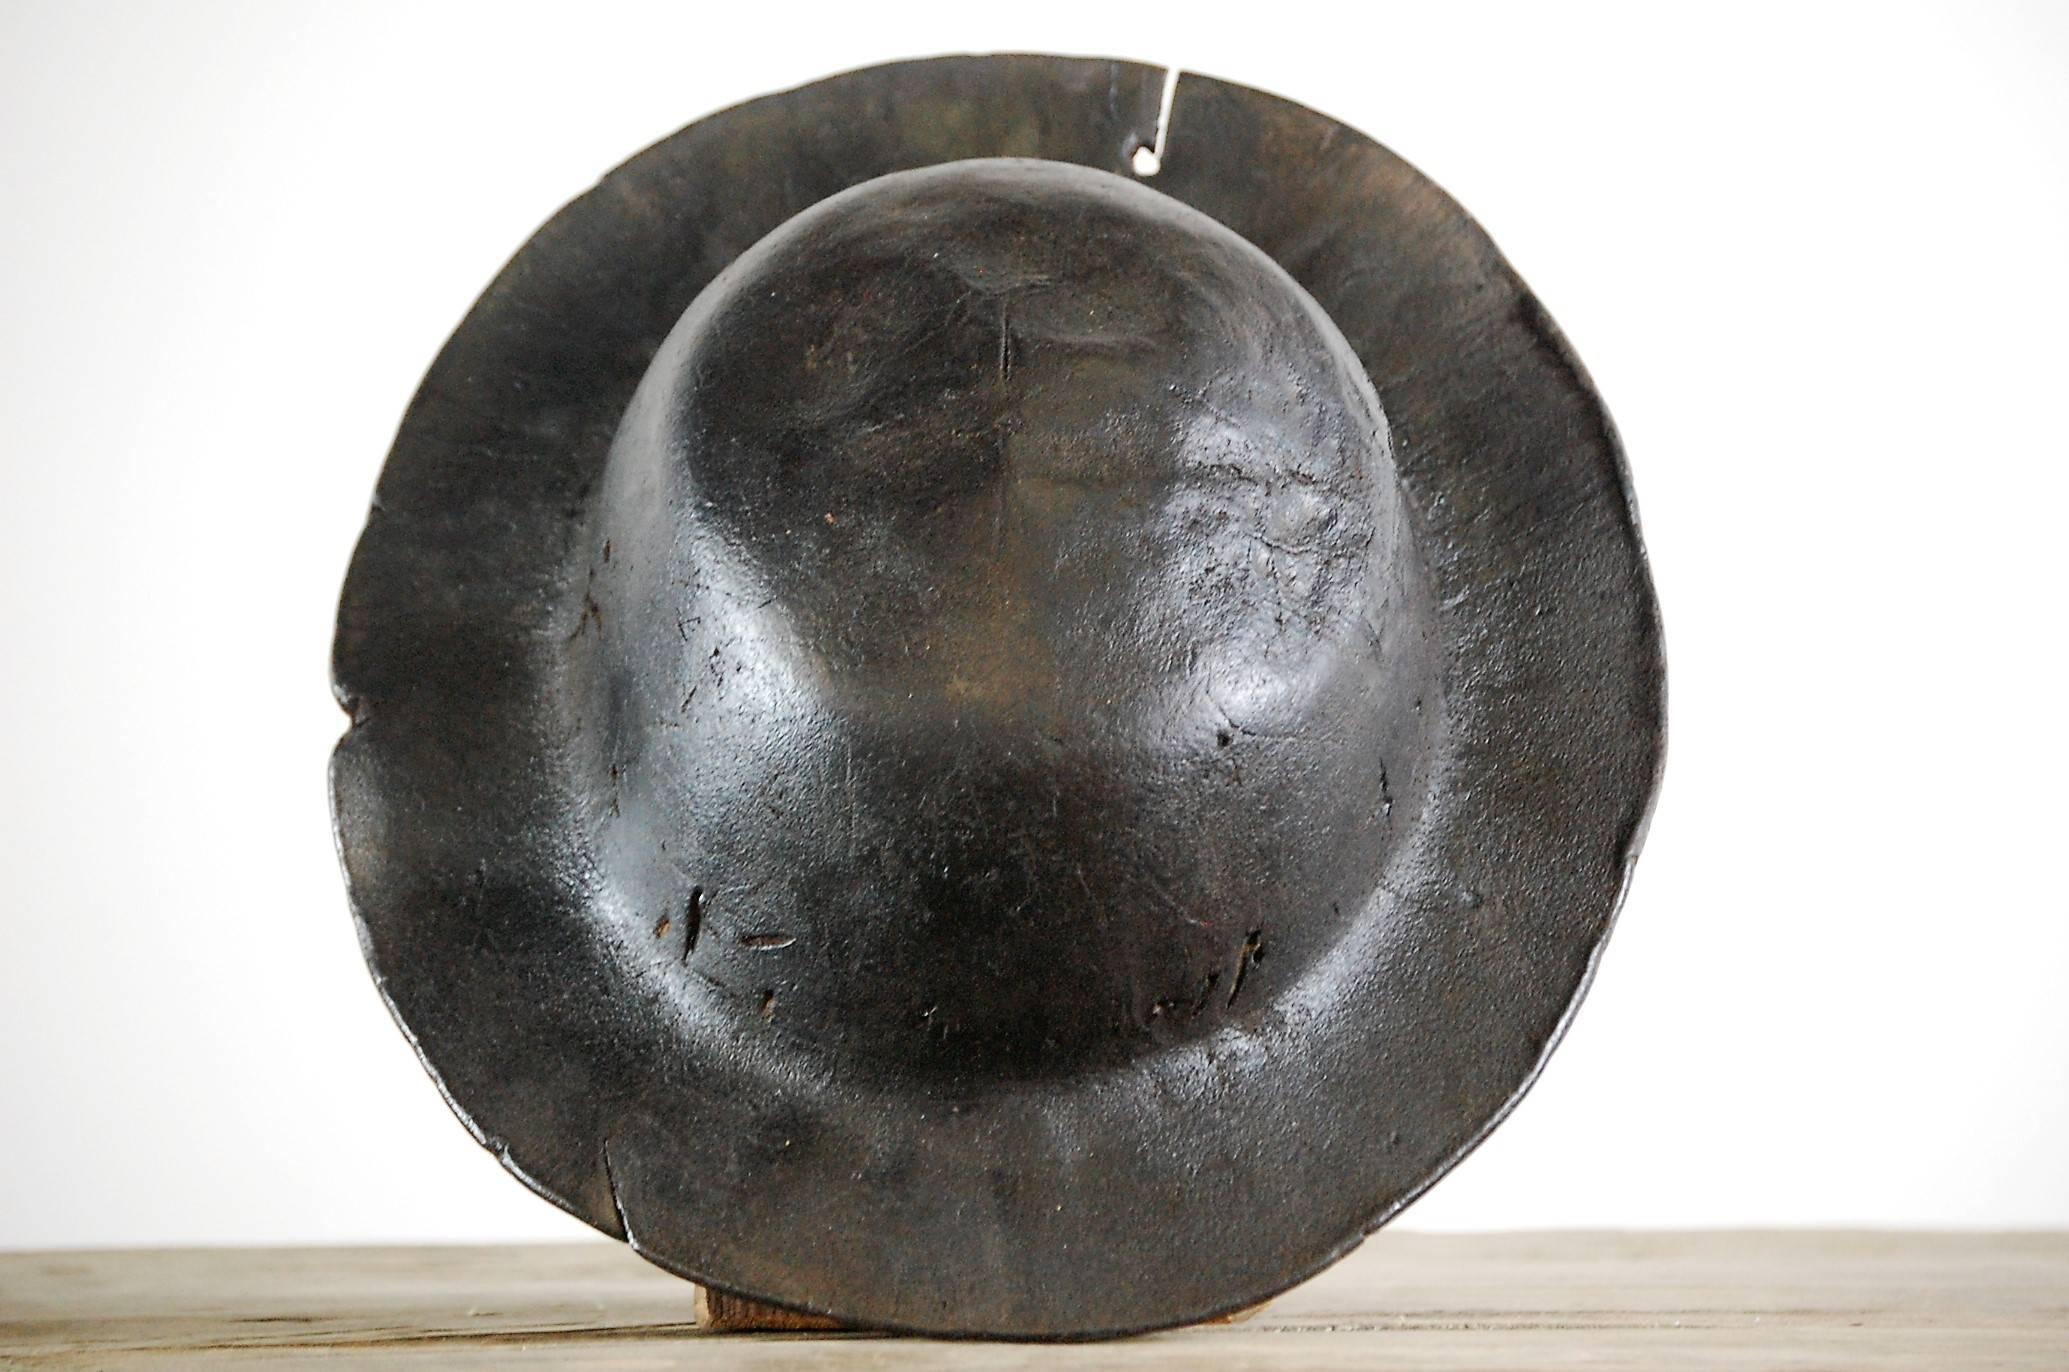 Antique leather miners helmet, An early example this helmet is made from leather. Dipping the helmet in water before wear would ensure a close fit and have a duel purpose of cooling the wearer in the high temperatures
Holes are present on the